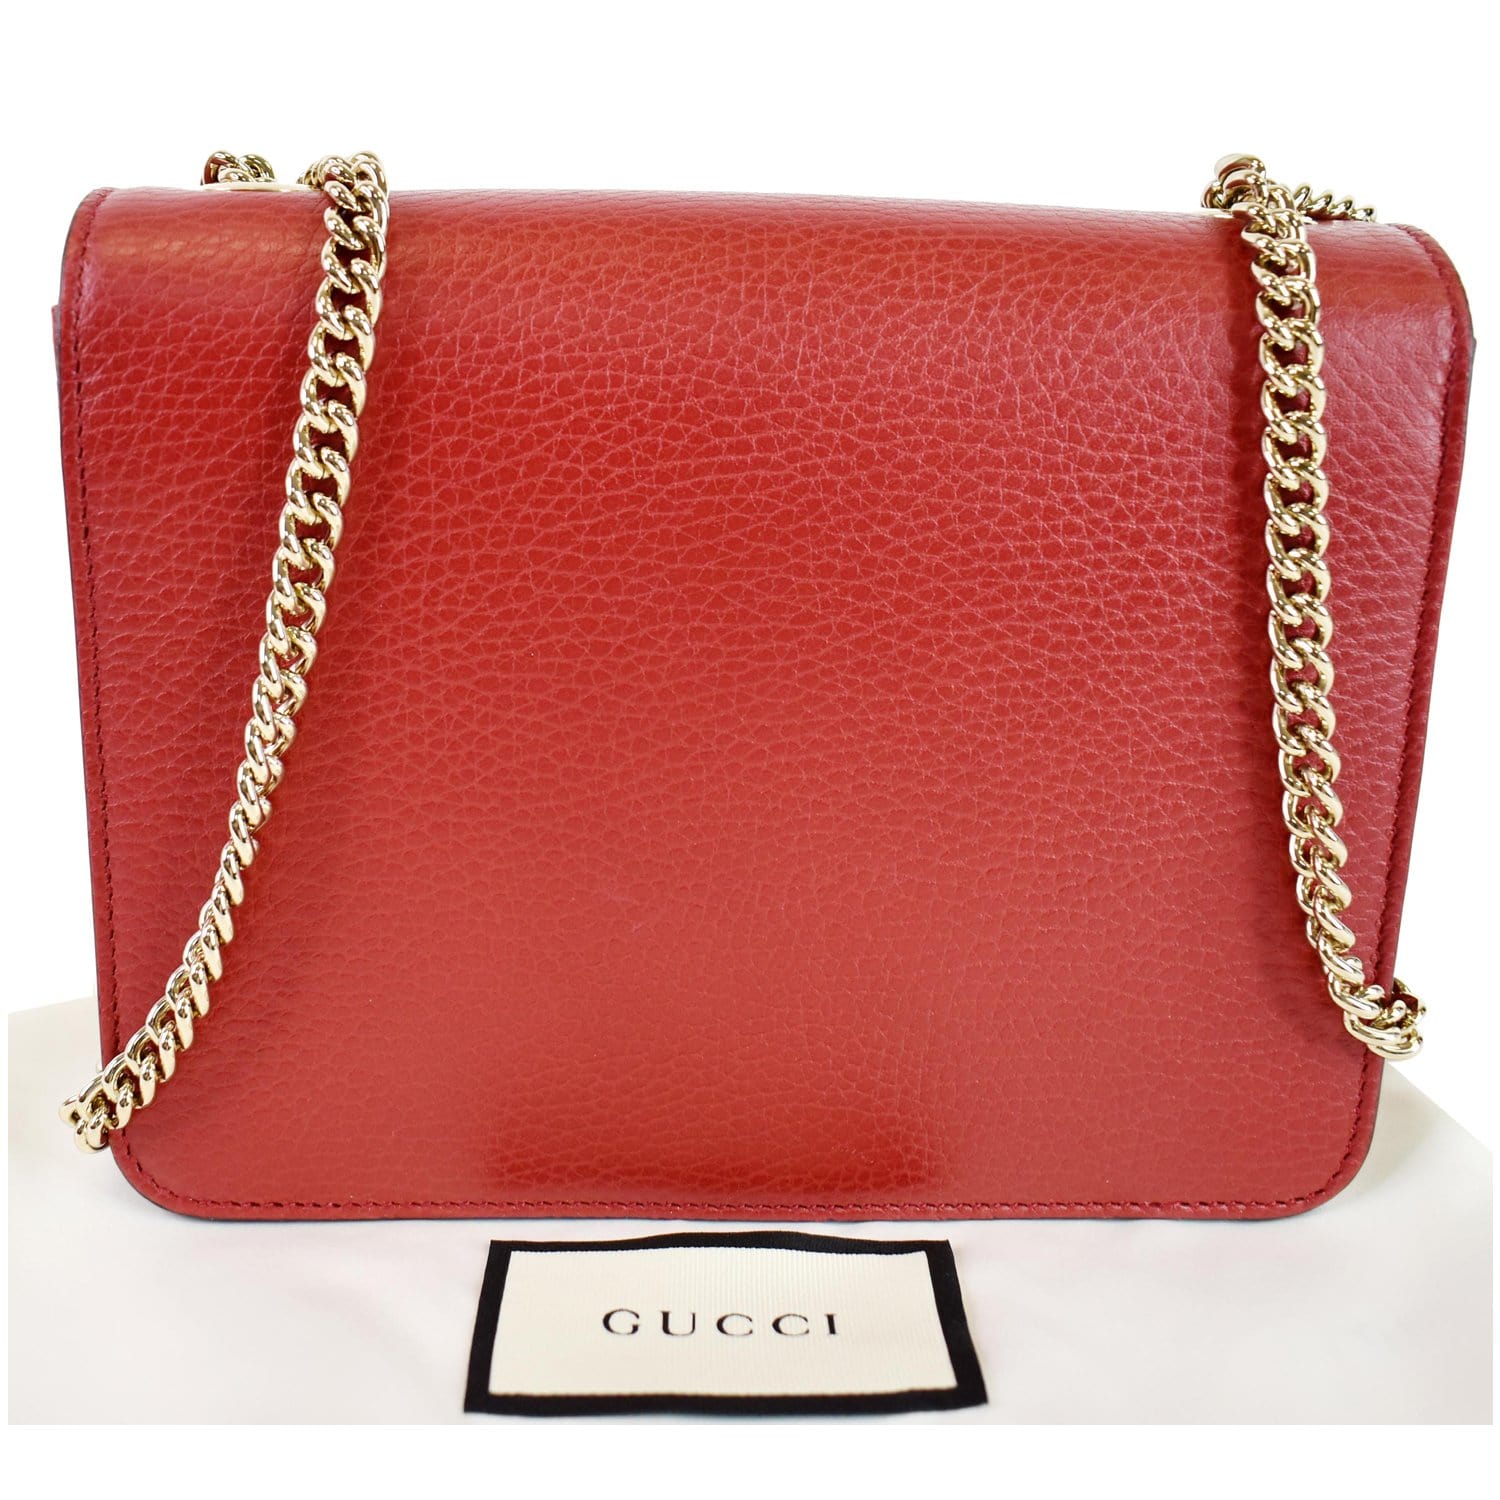 Authentic New Gucci Red Leather 510304 Interlocking GG Crossbody